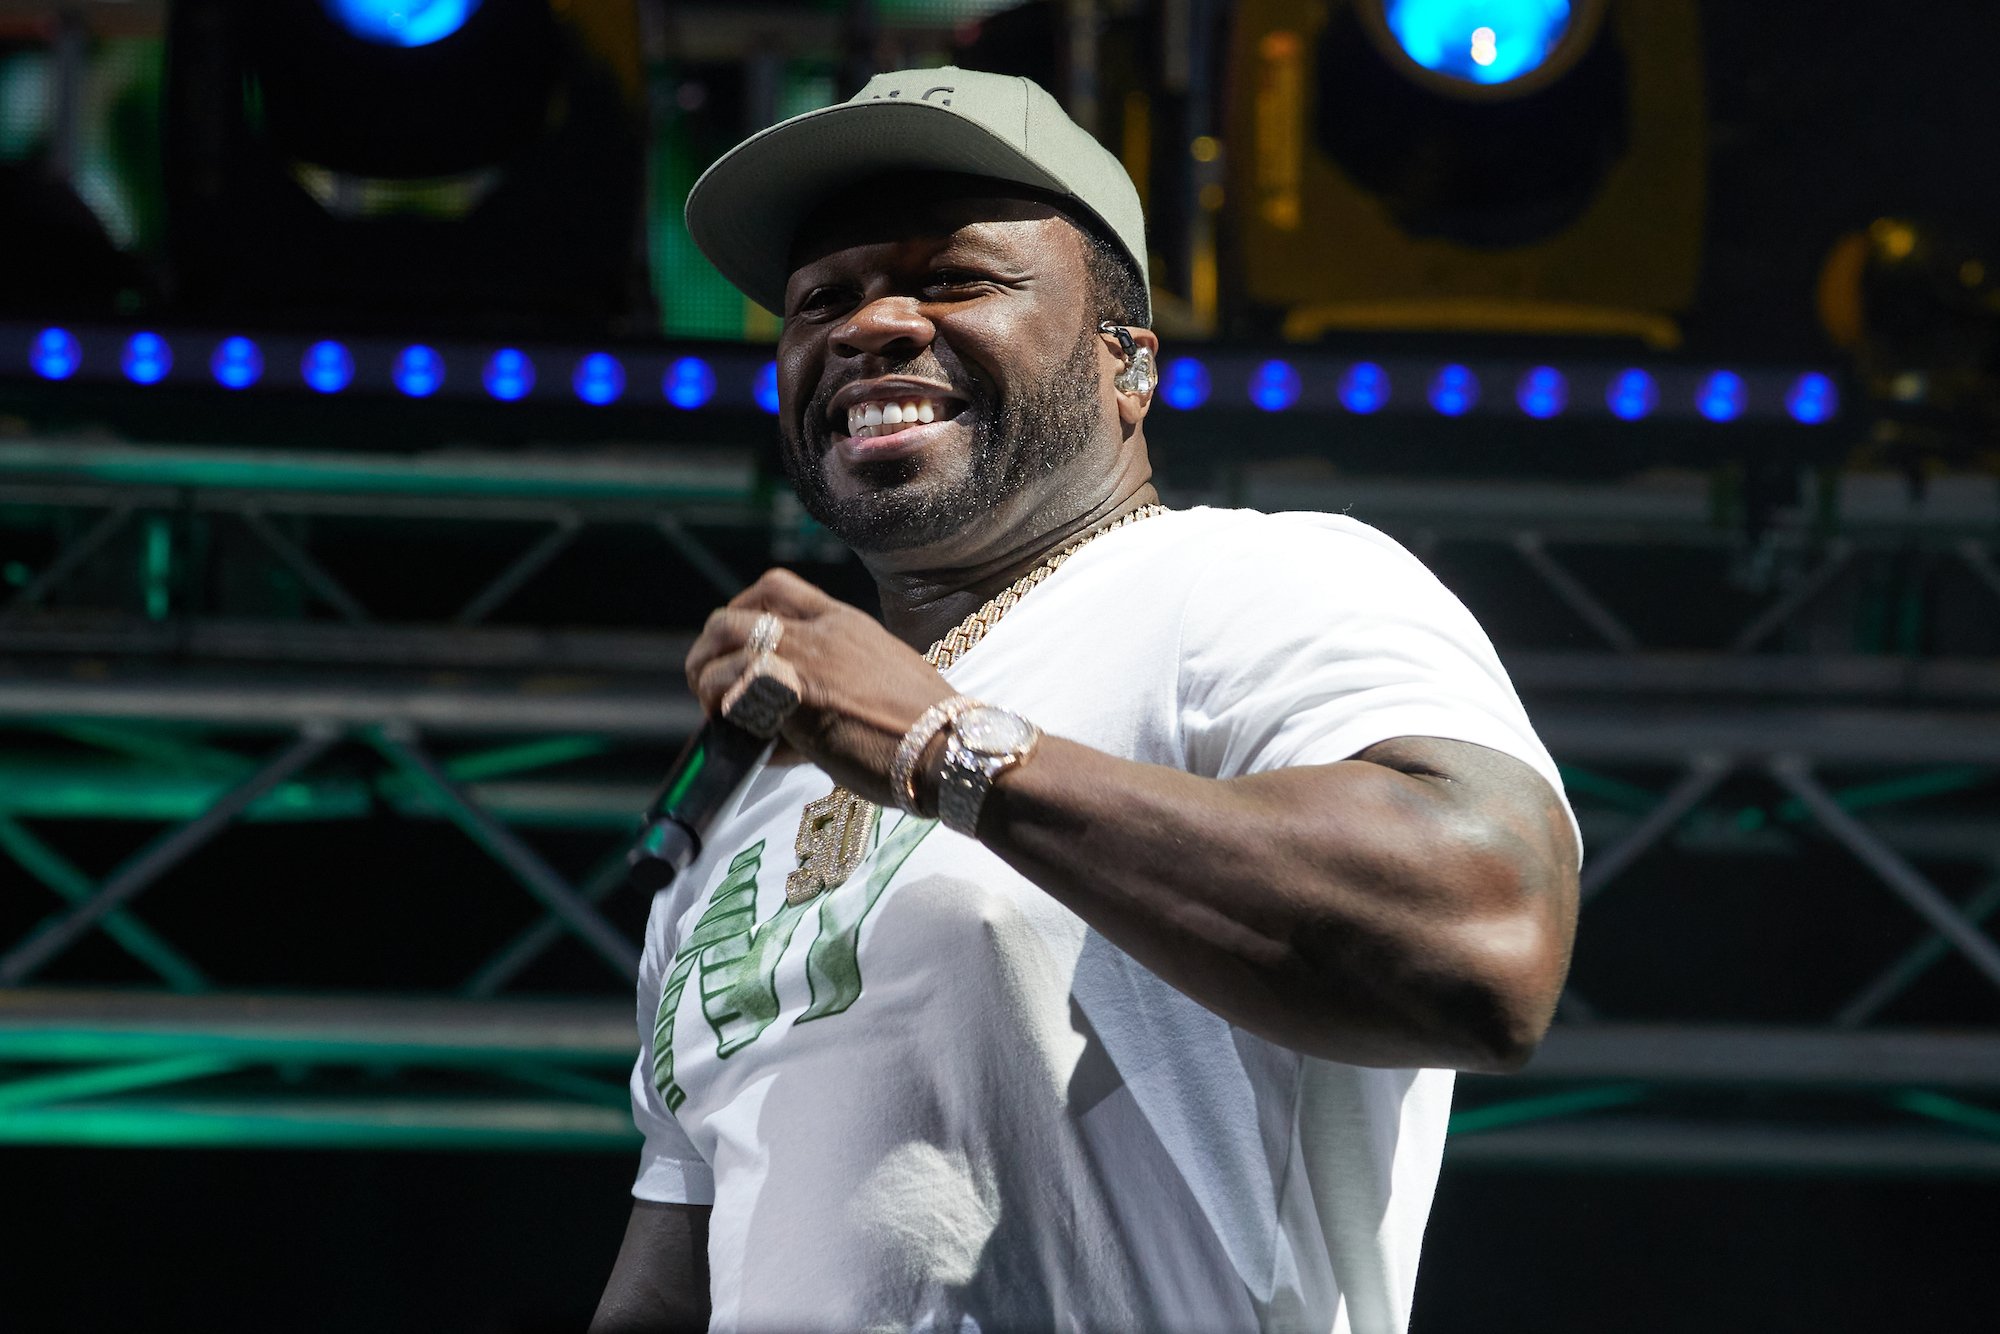 50 Cent, whose son criticized his child support, performing on stage